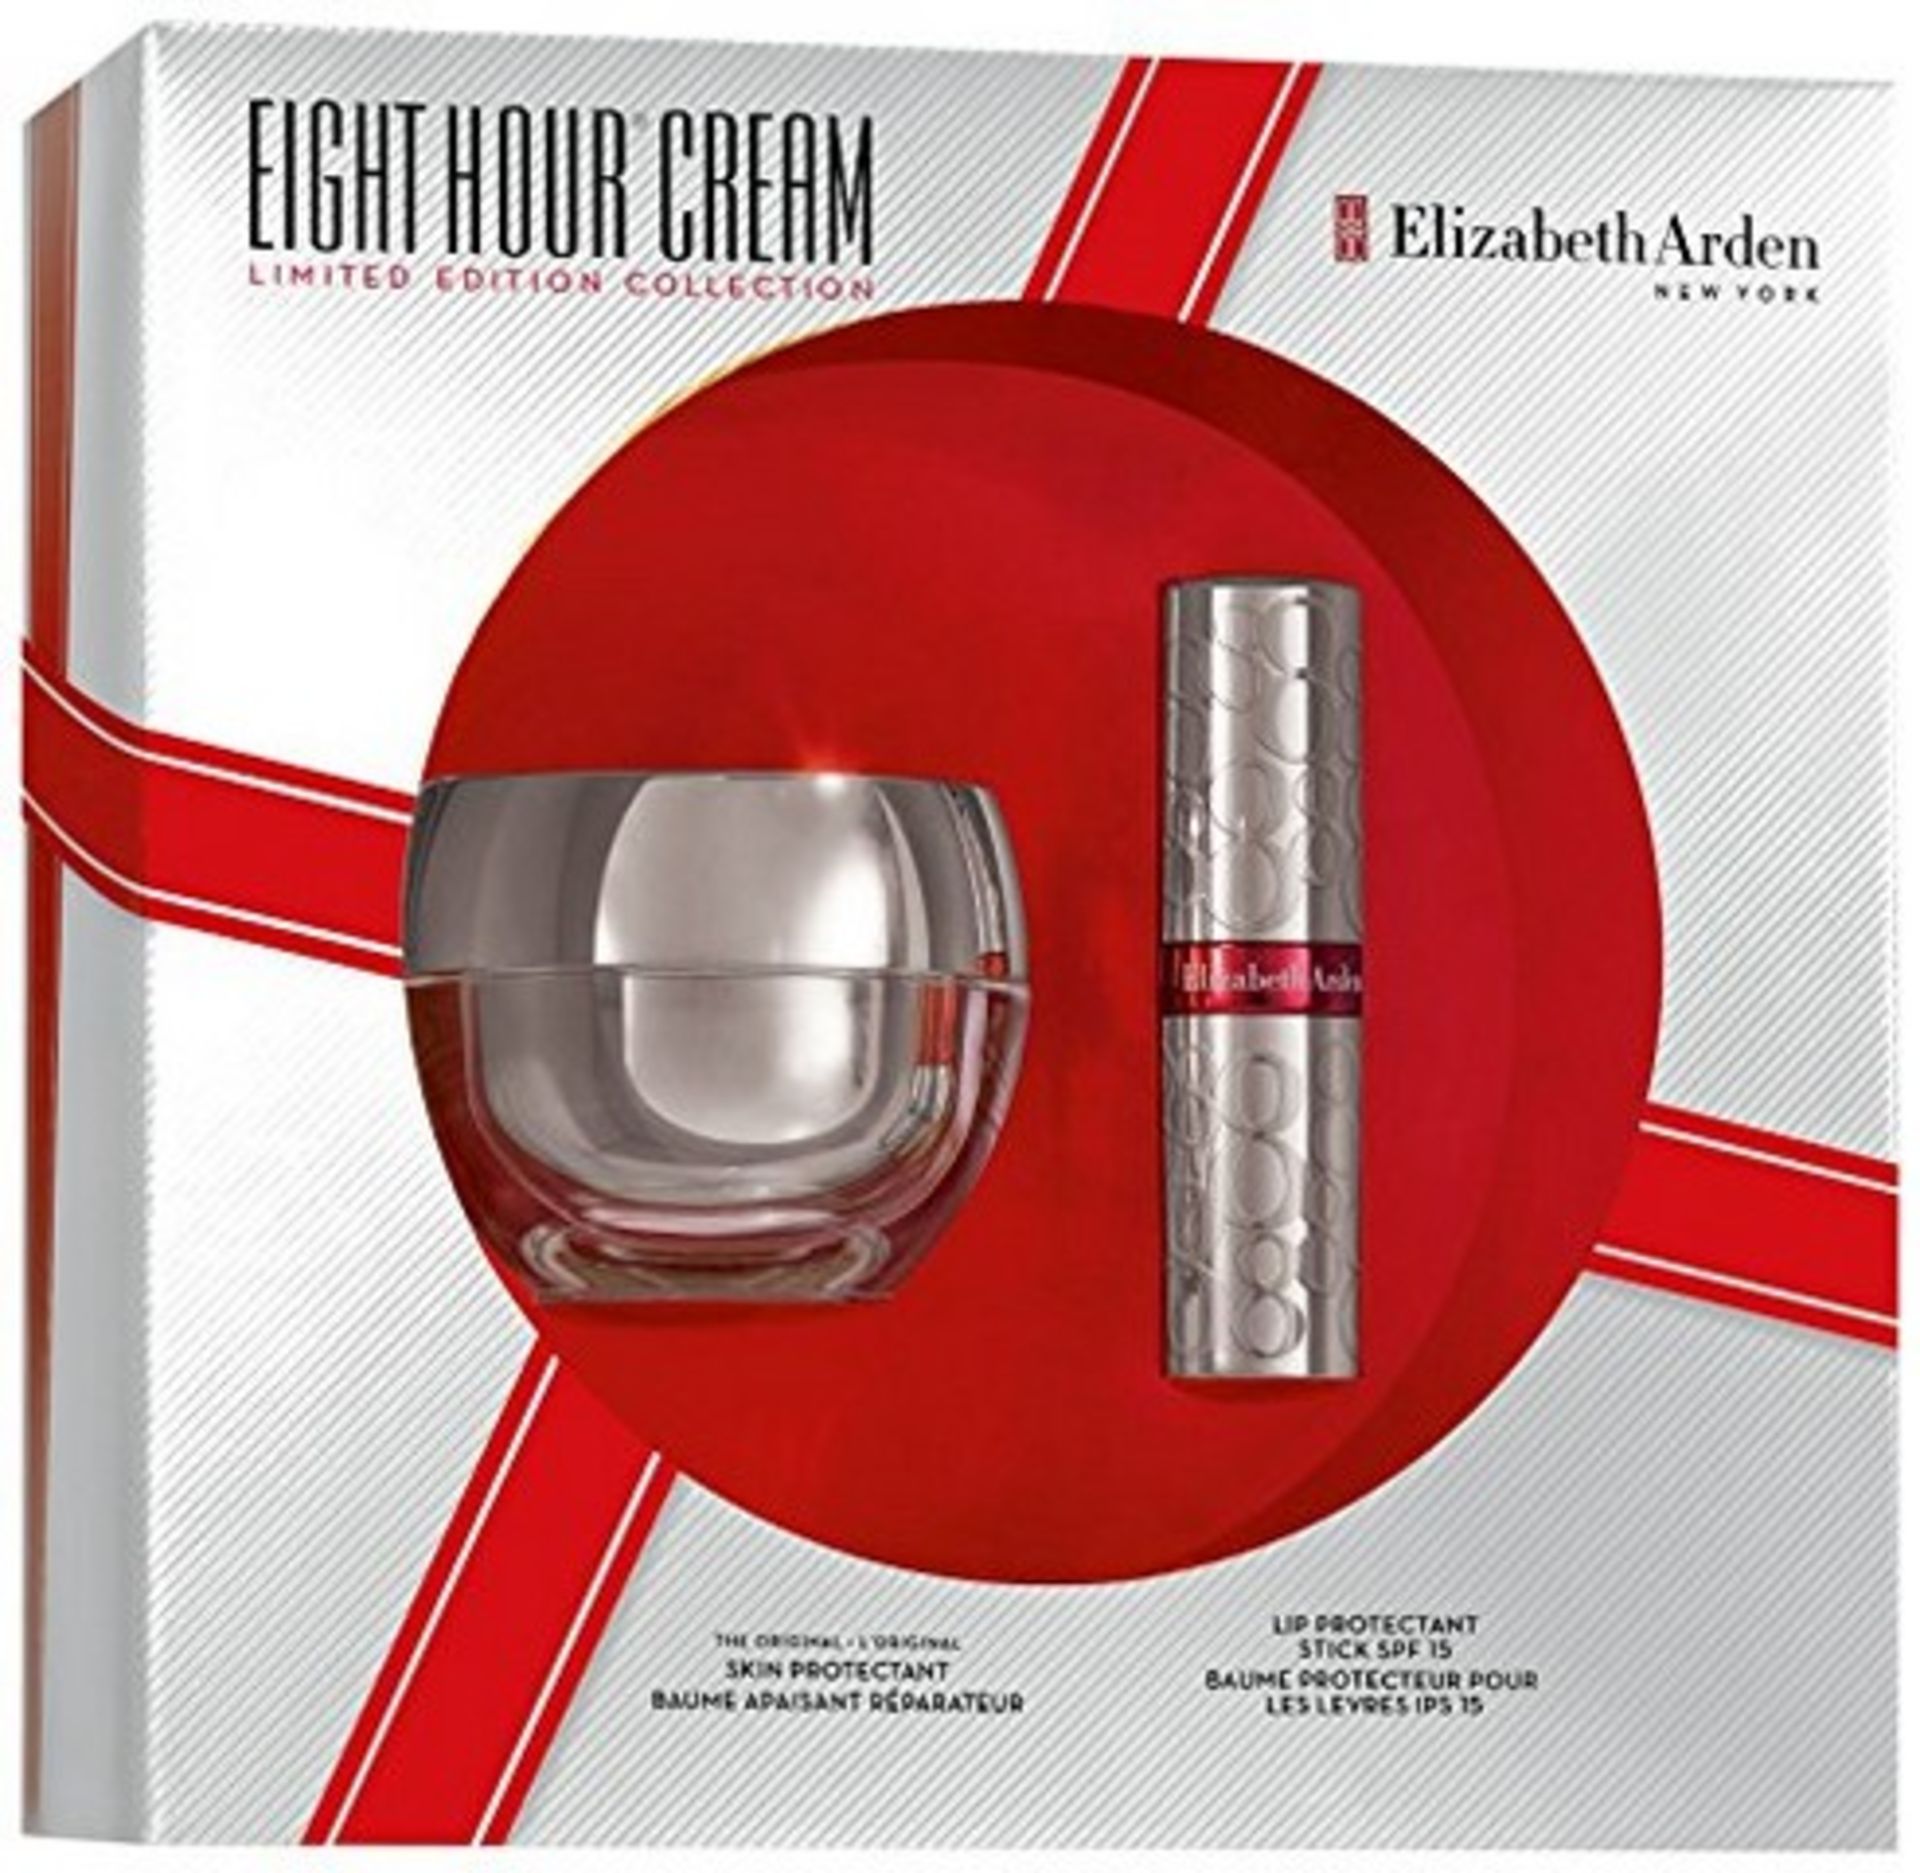 V Brand New Elizabeth Arden Limited Edition Eight Hour Cream Skin Protectant & Lip Protectant